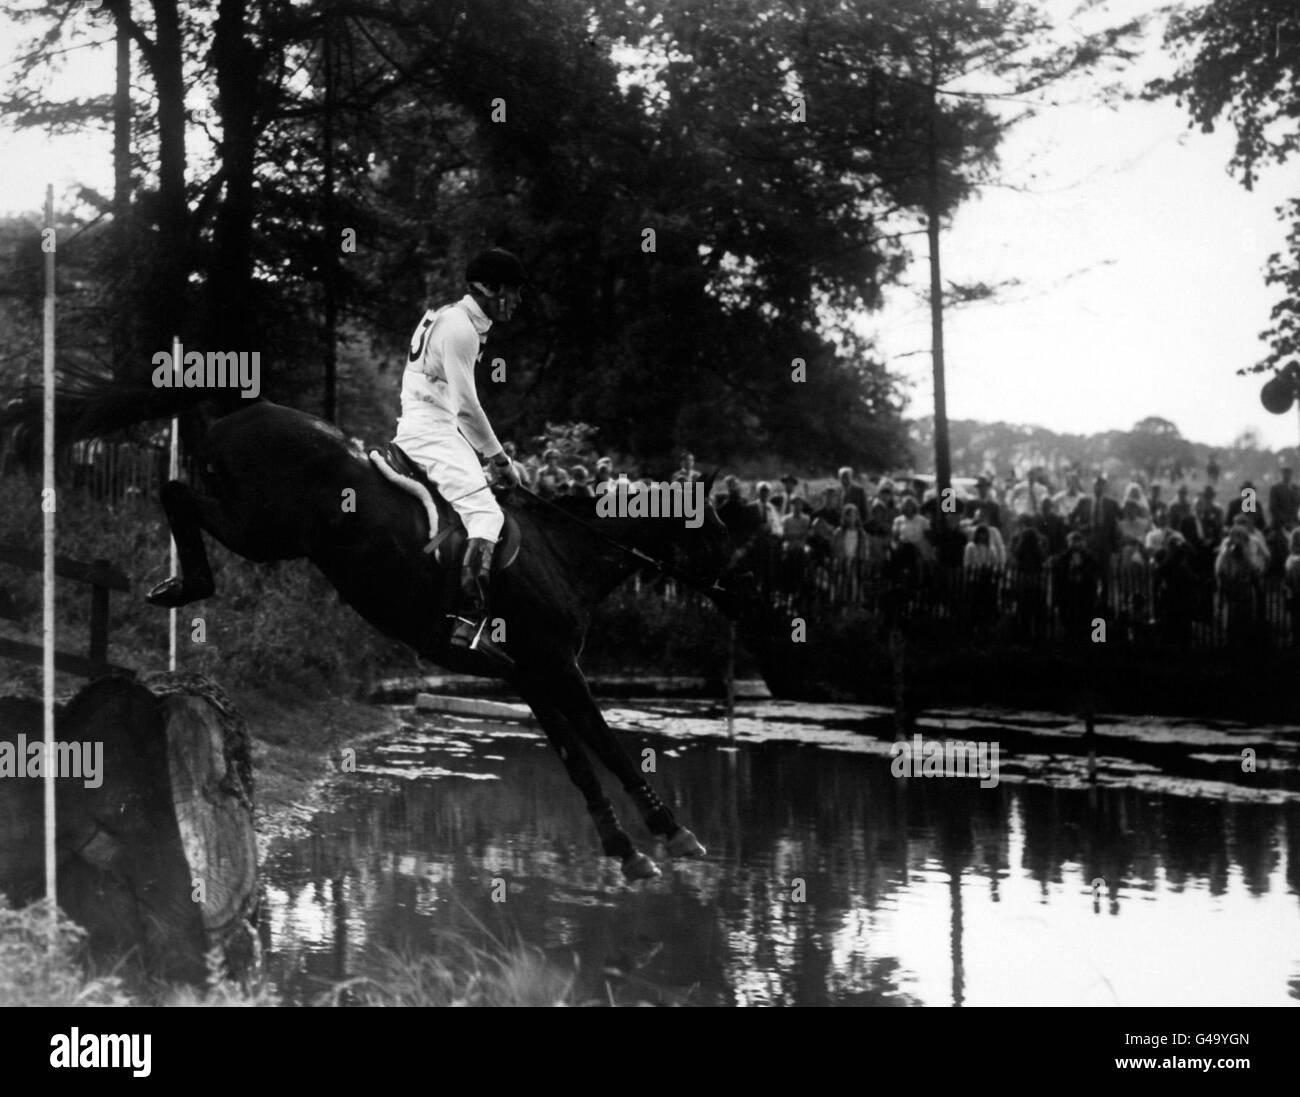 Equestrian - Burghley Three Day Event Horse Trials - Second Day - Cross Country. Richard Meade, who won the cross-country on 'Barberry', jumps into the water at fence 22 Stock Photo